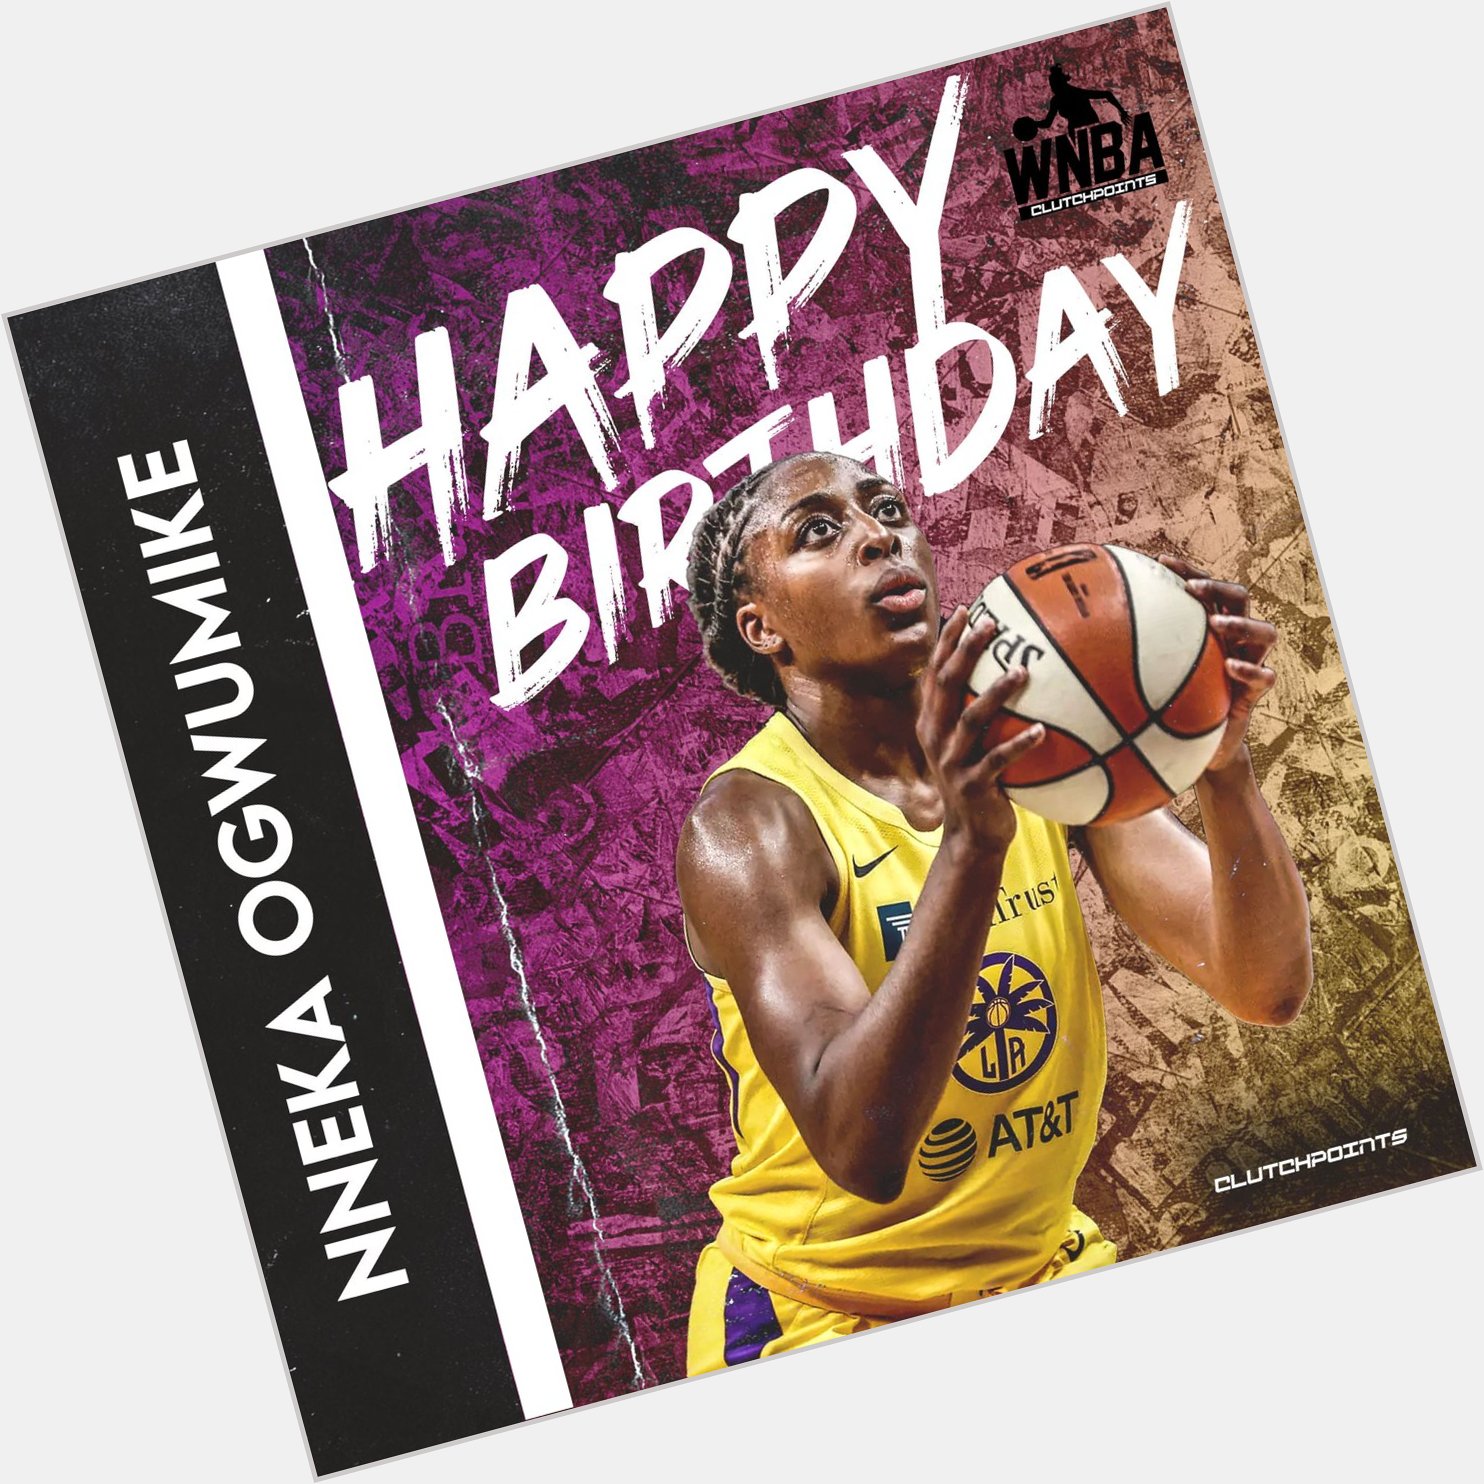 WNBA fans, let\s all greet Los Angeles Sparks star Nneka Ogwumike a happy 31st birthday!  